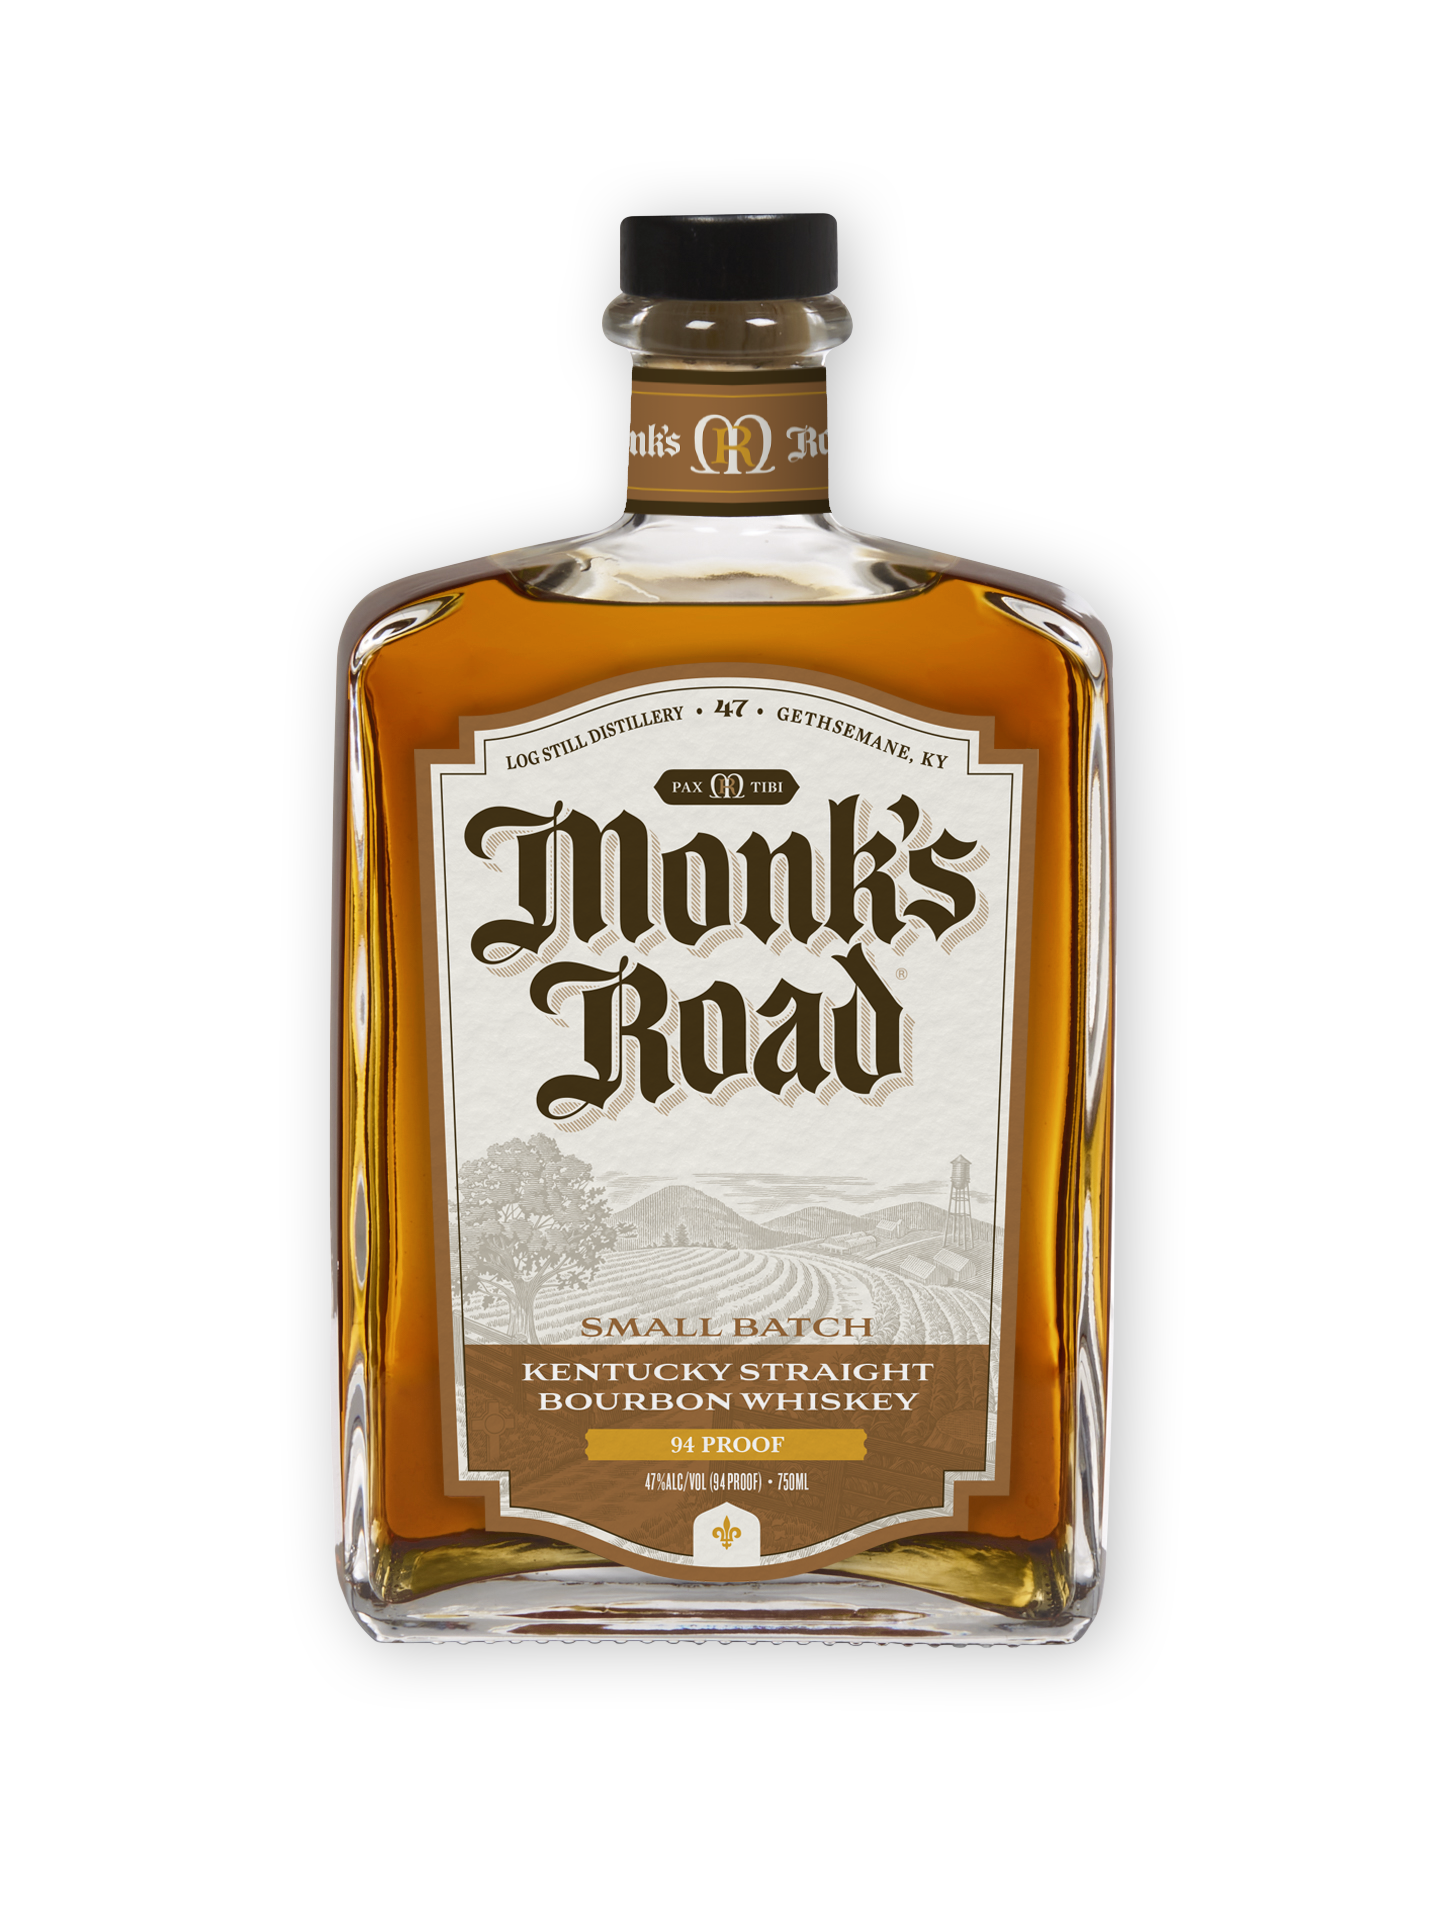 Monk's Road Dry Gin